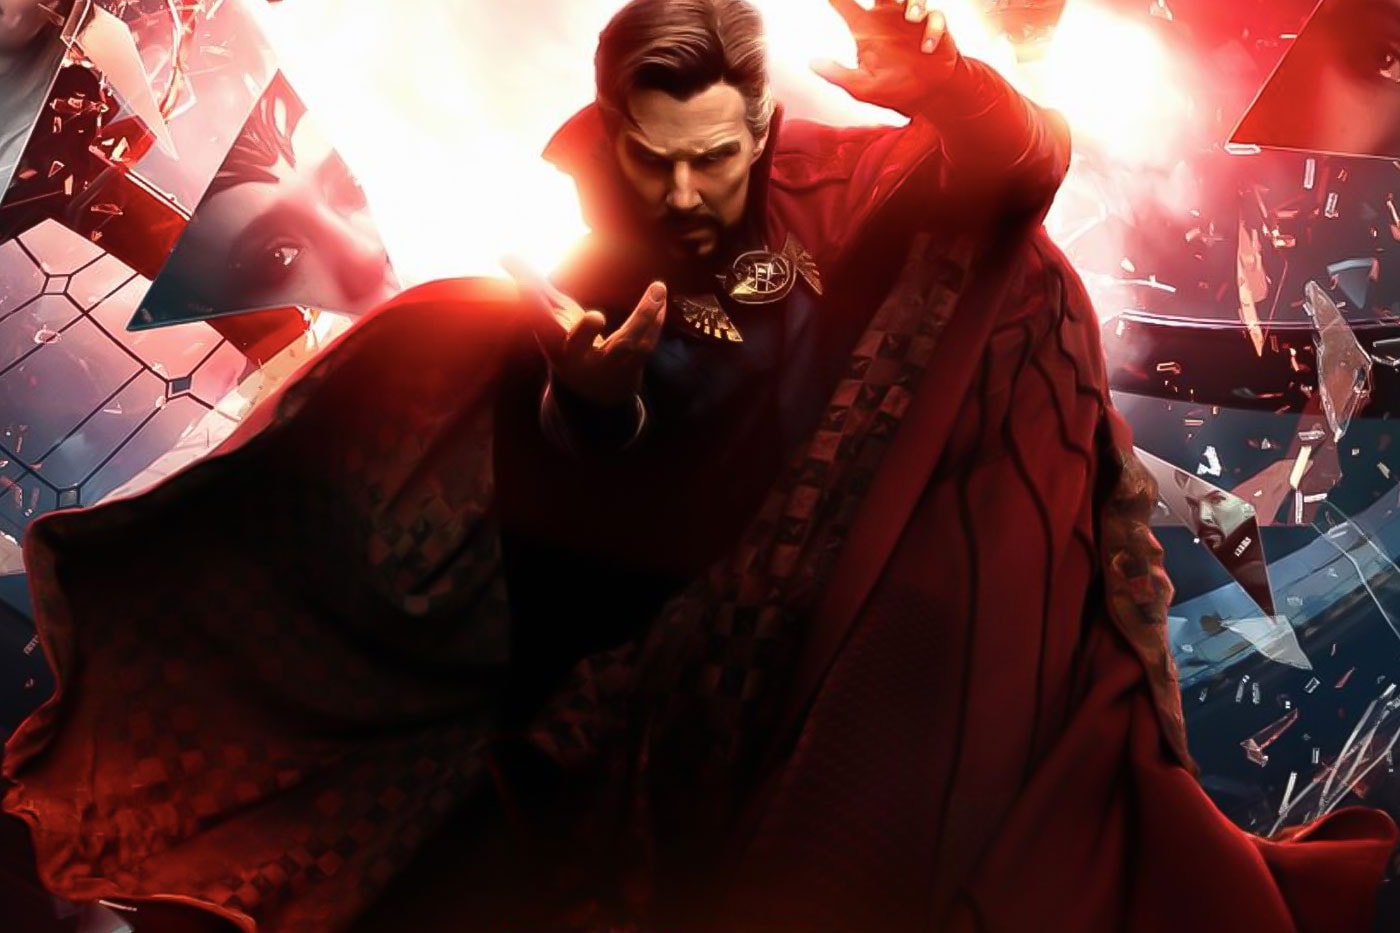 Benedict Cumberbatch Says 'Doctor Strange' Success Will Be "On the Level" of 'No Way Home'  doctor strange in the multiverse of madness spider-man: no way home marvel cinematic universe mcu disney tom holland